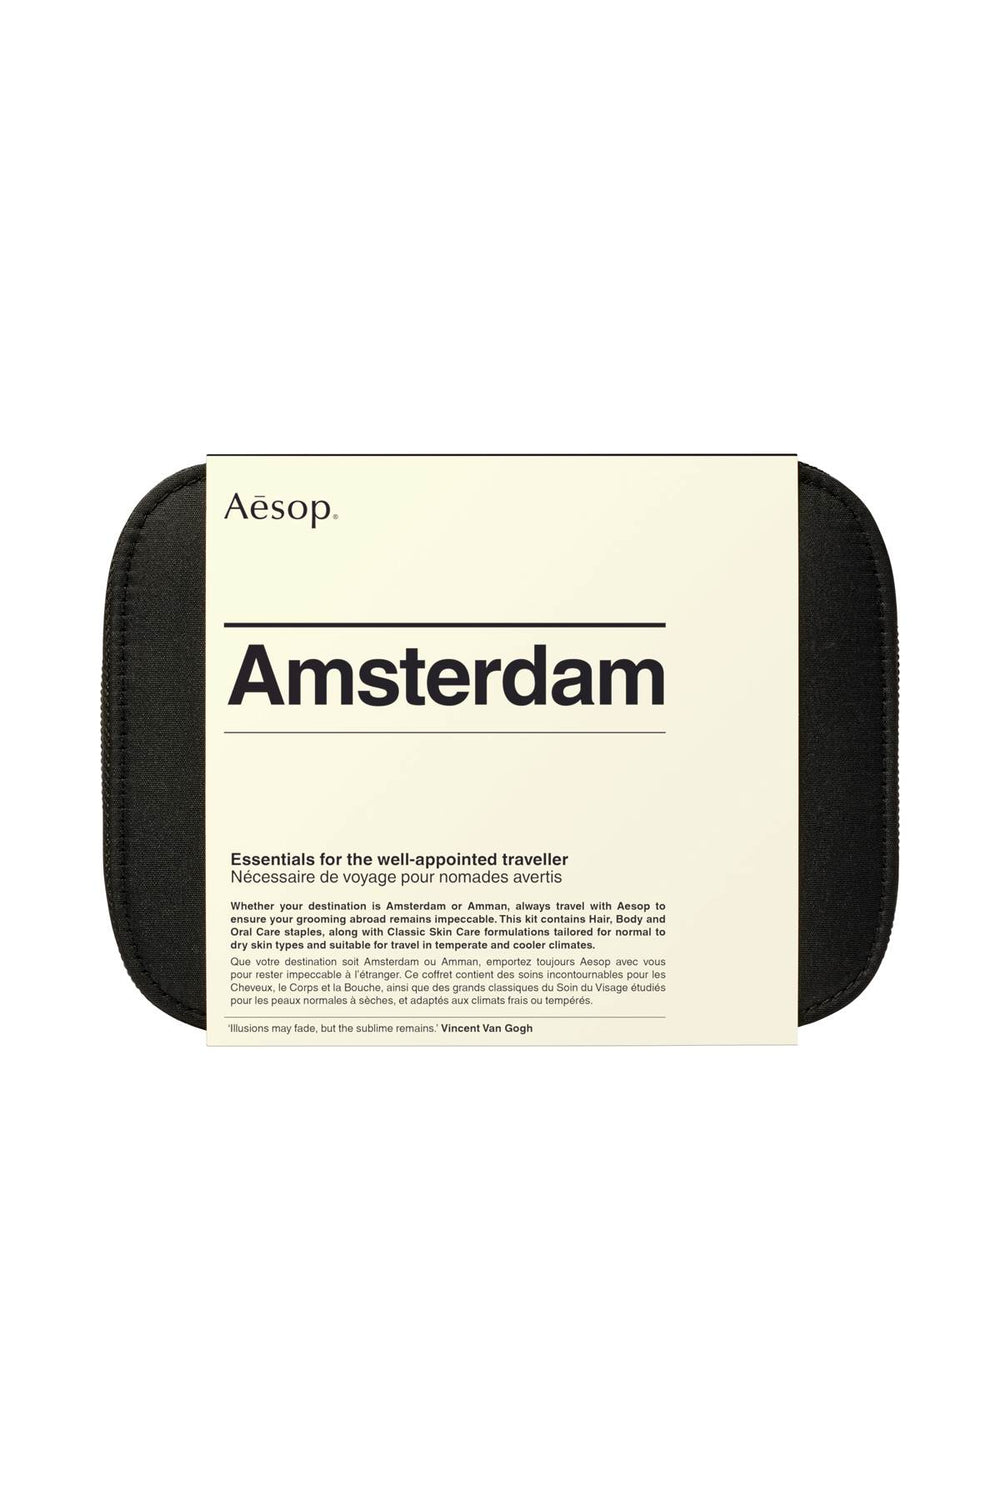 amsterdam essentials for the well-appointed traveller - 10ml 3x15ml 5x50ml-1